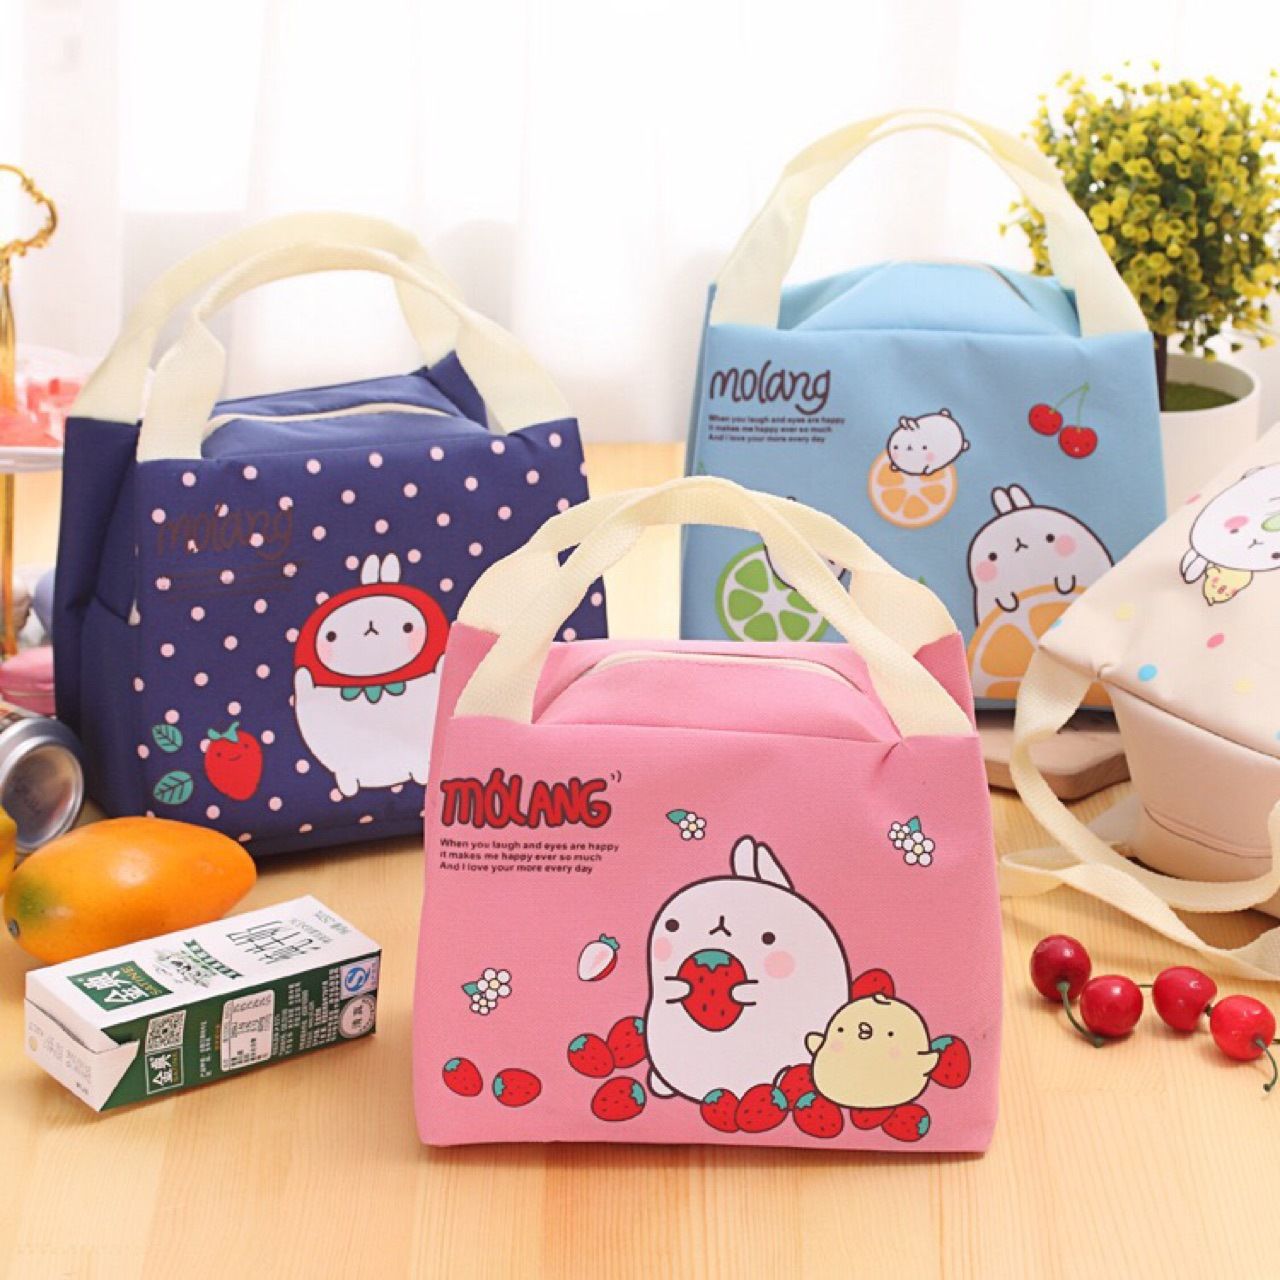 Lunch box bag portable lunch aluminum foil thickened hand-carry lunch bag lunch box bag students go out canvas insulation bag